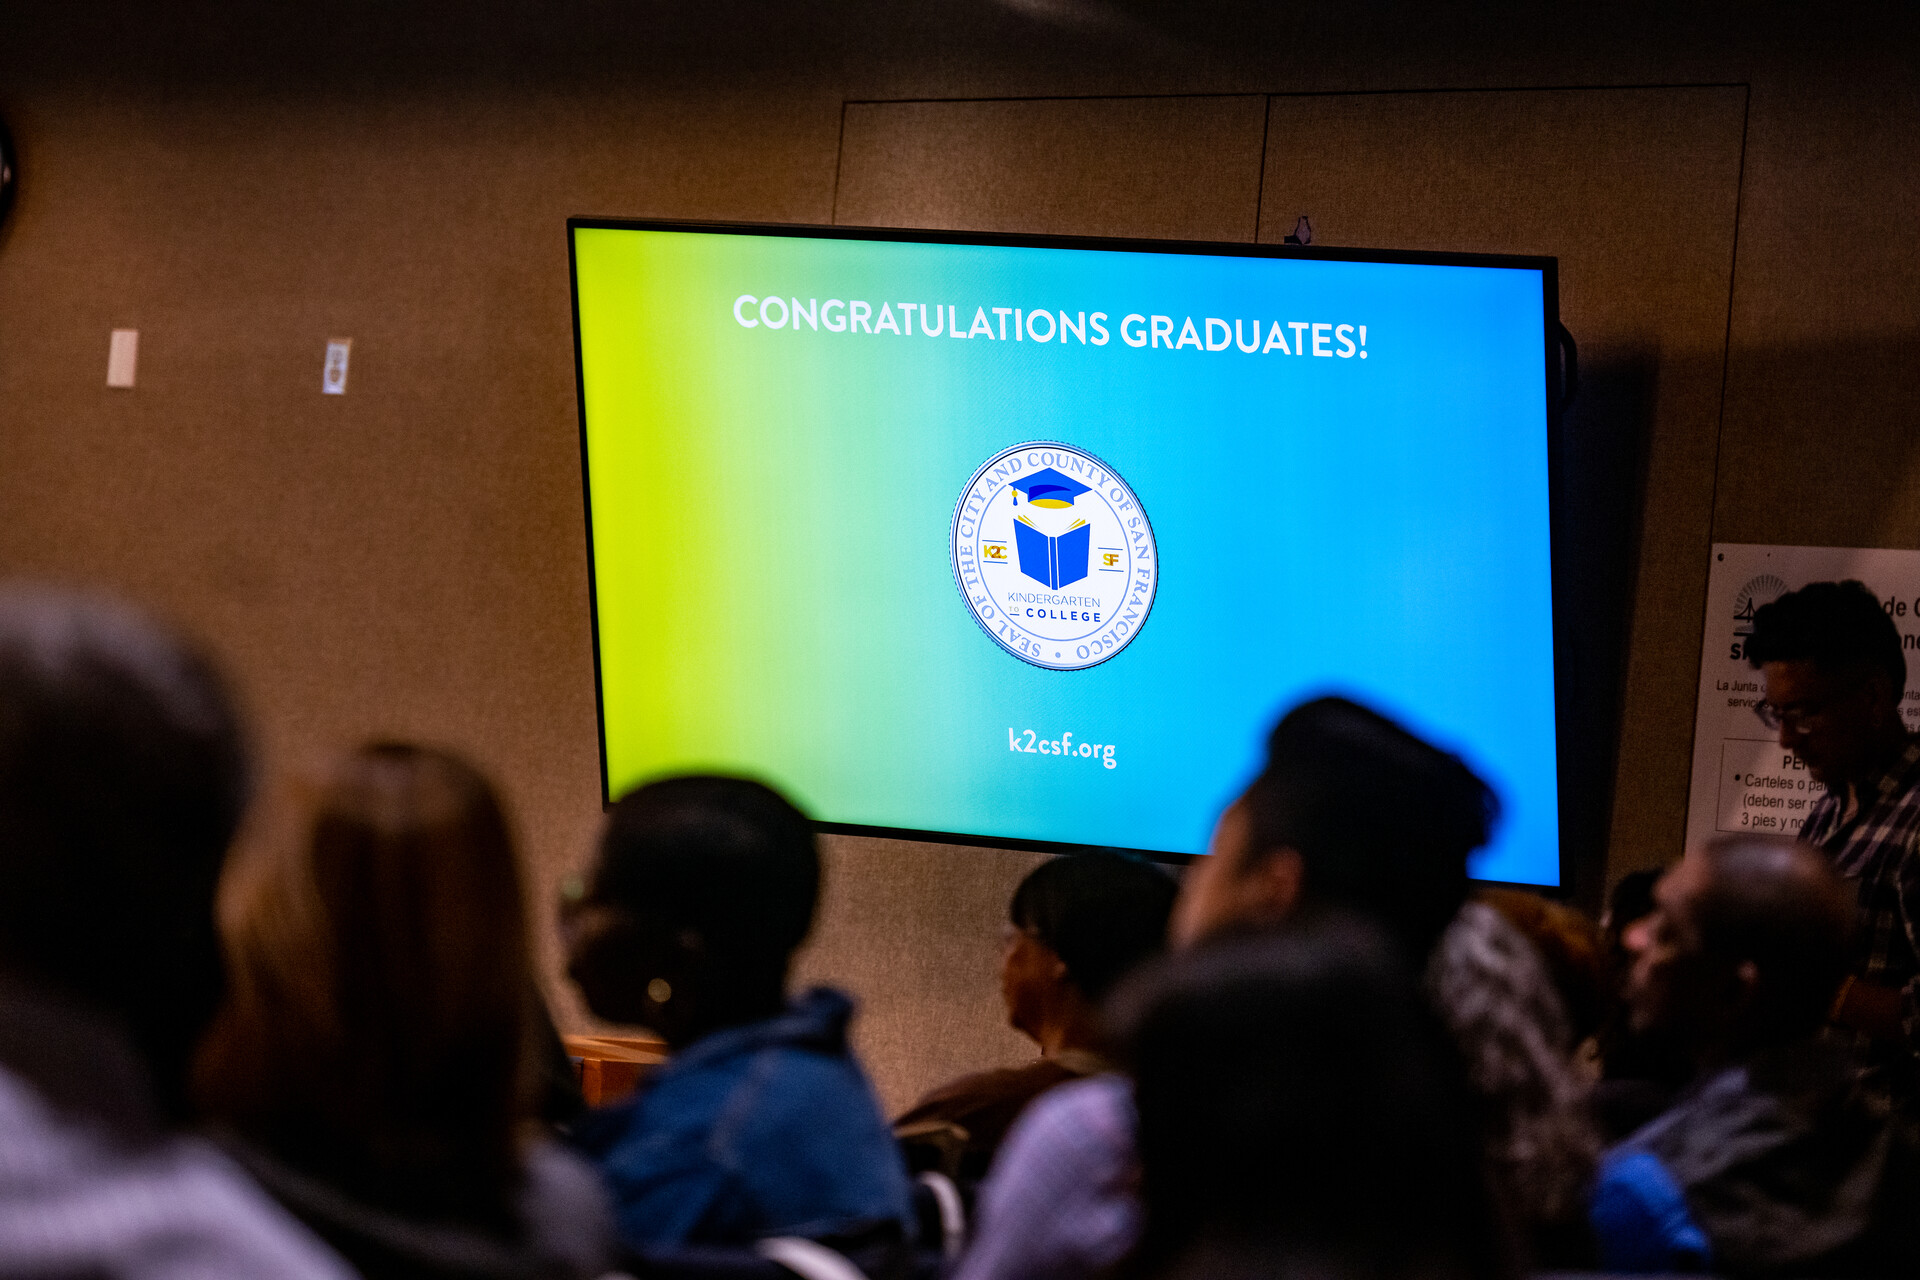 A crowd of people sit inside a large conference room and look away from the camera. Behind them, a large monitor reads out, "Congratulations graduates!"